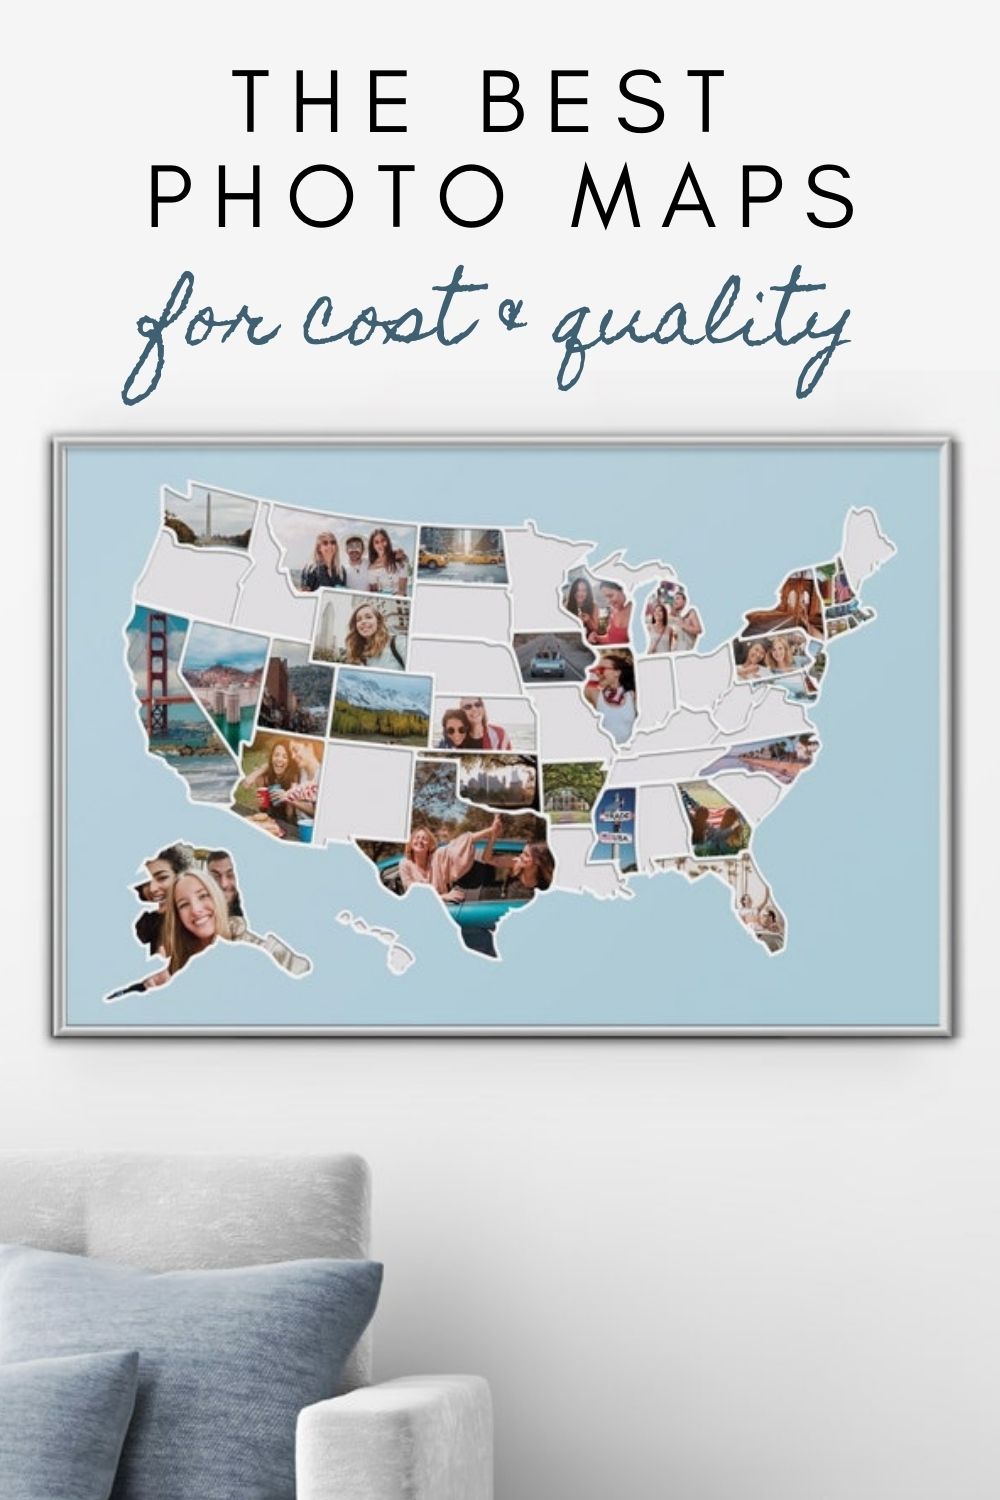 50 States Travel Map USA Photo Map Fits 24 x 36 in Frames Made from Flexible Plastic States Marked 